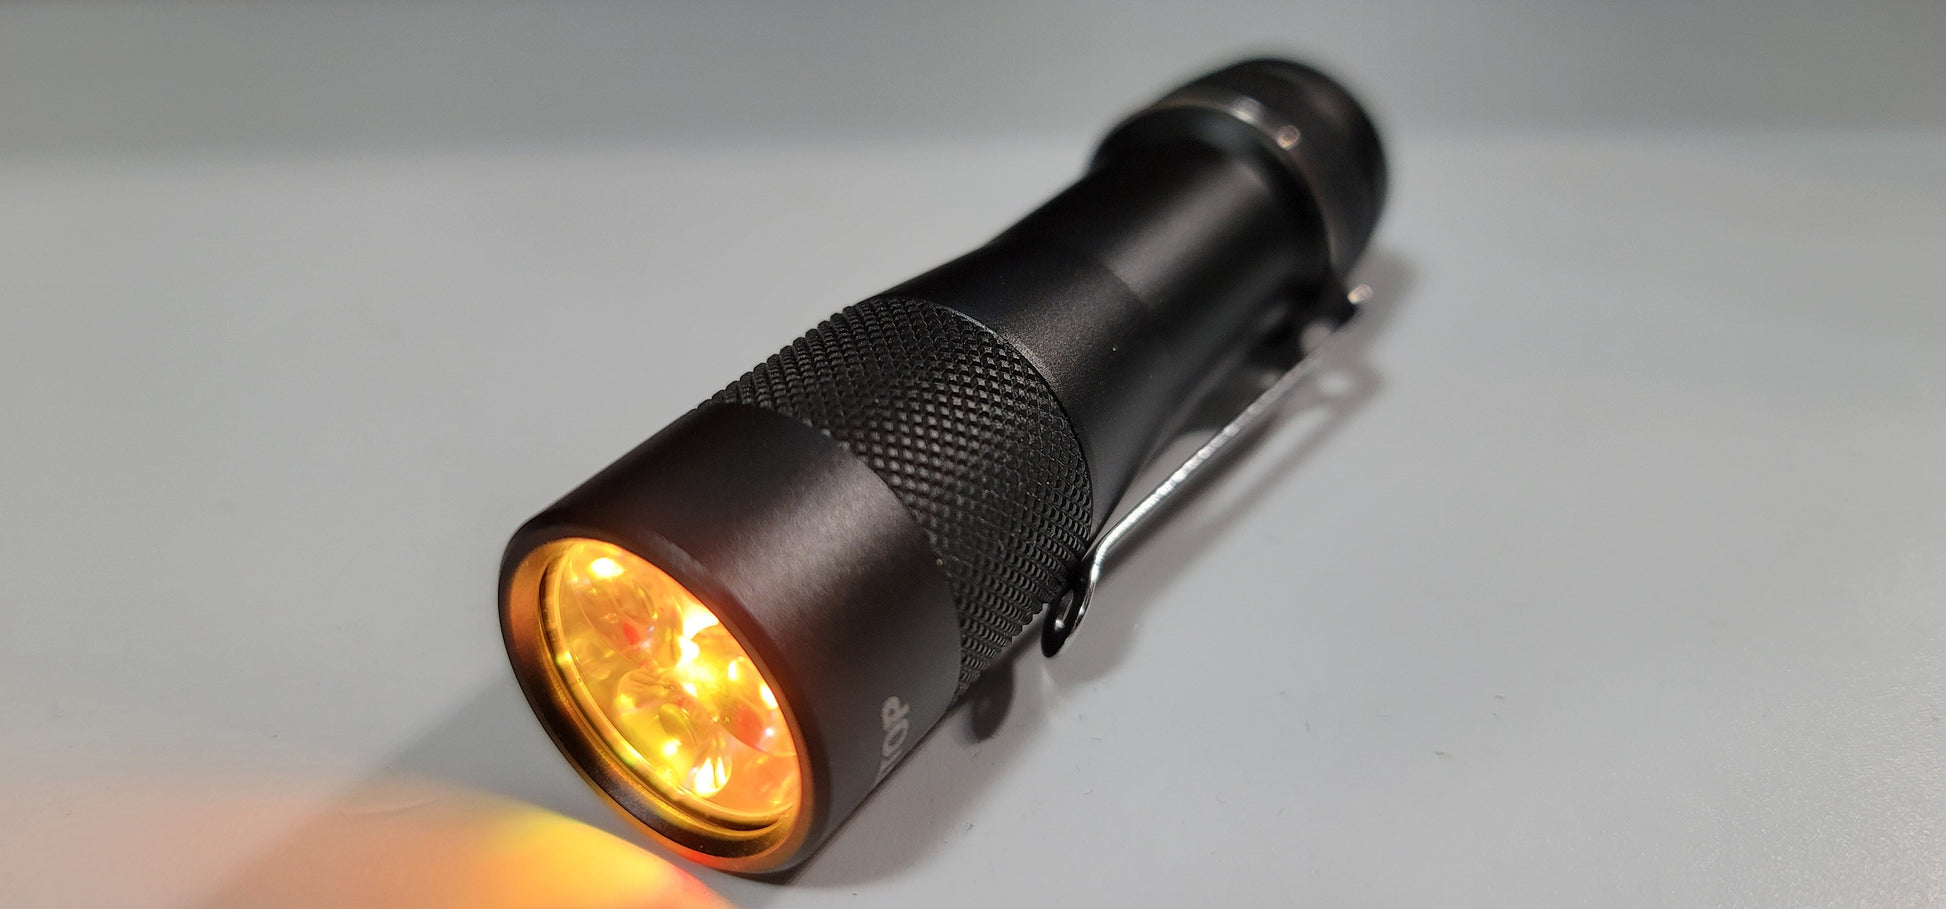 Lumintop FW3X 2800 Lumens EDC LED Flashlight with Lume1 Driver and Aux LED *DISCOUNTED*